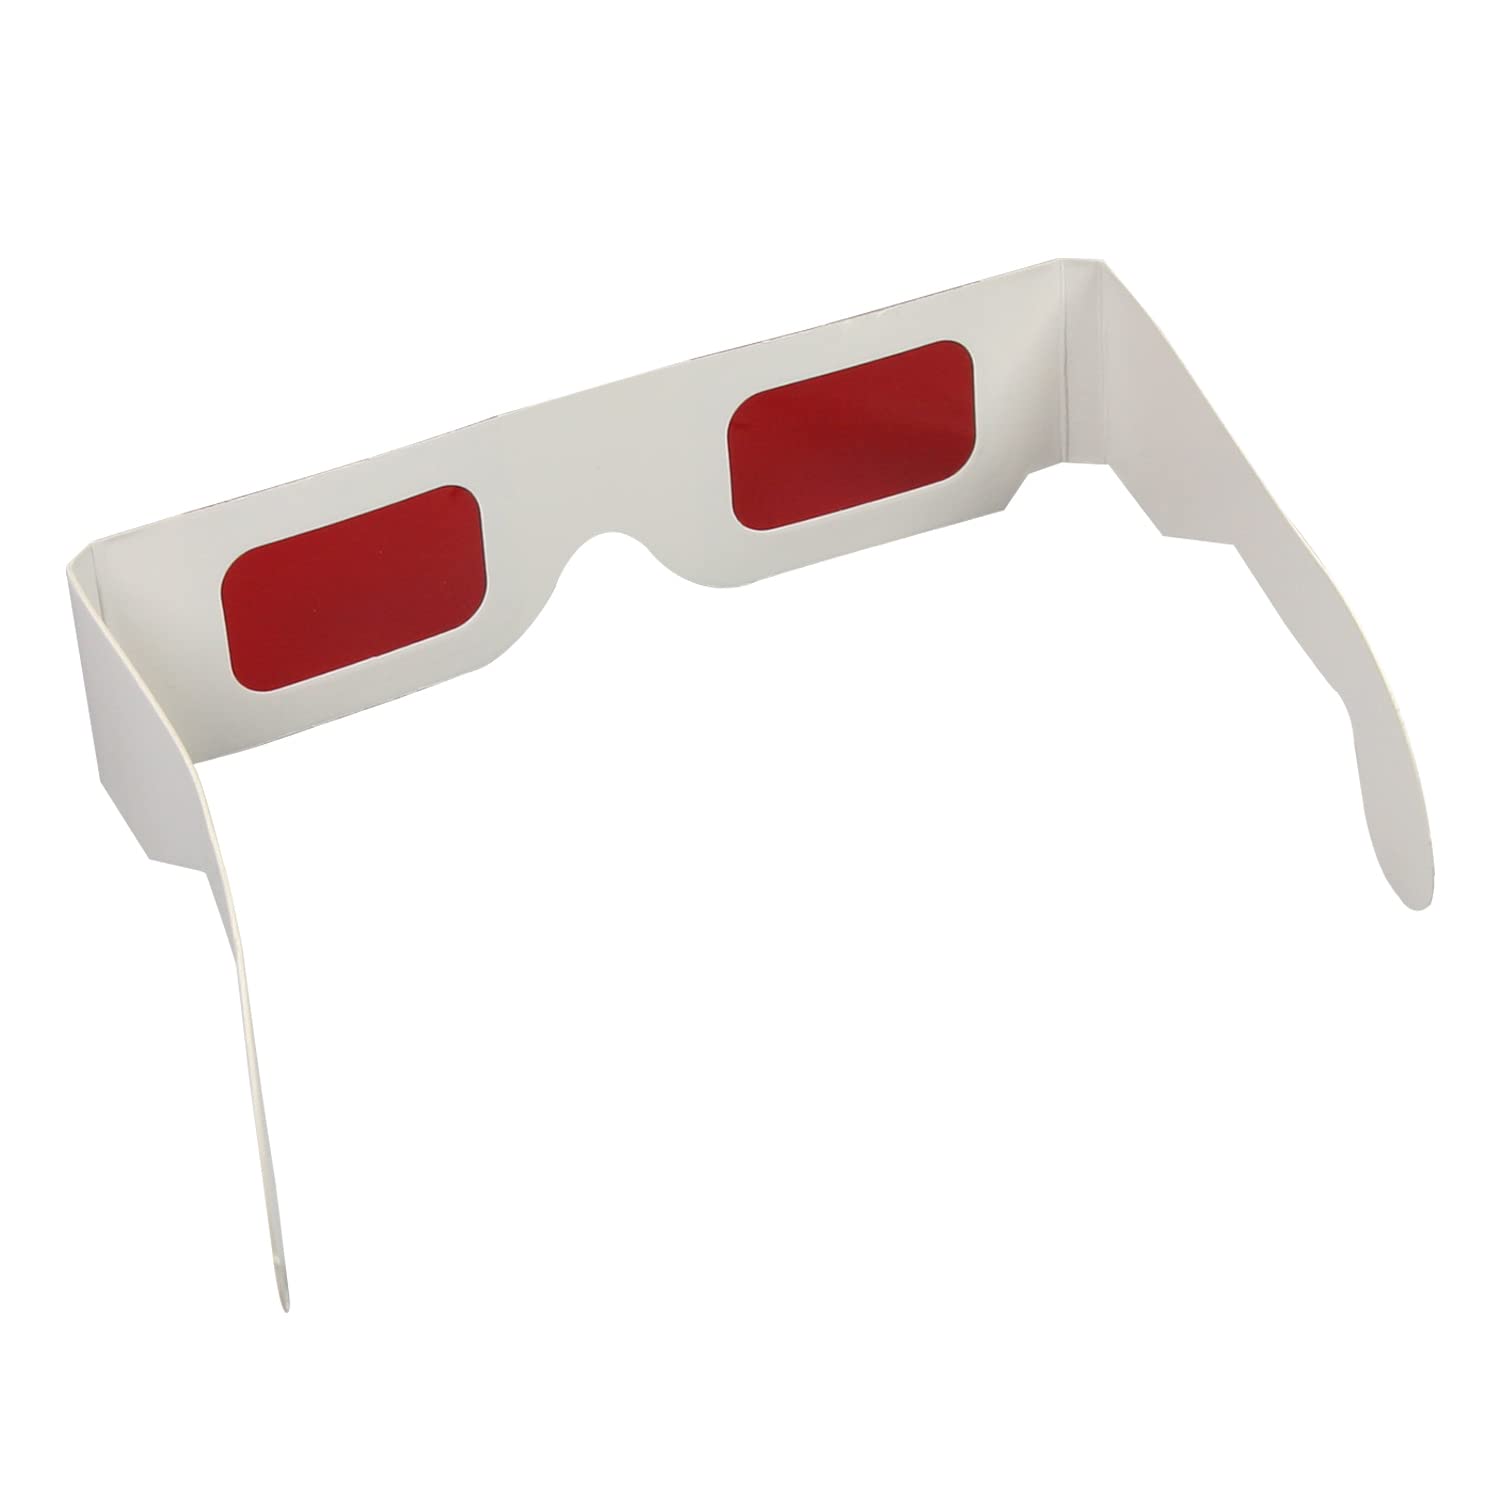 Othmro 20Pcs Red-Red 3D Glasses Carboard Frame White Resin Lens 3D Movie Game-Extra Upgrade Style Glasses 3D Viewing Glasses for Anaglyph Movie Photo Projector Film Television Computer Screen Game